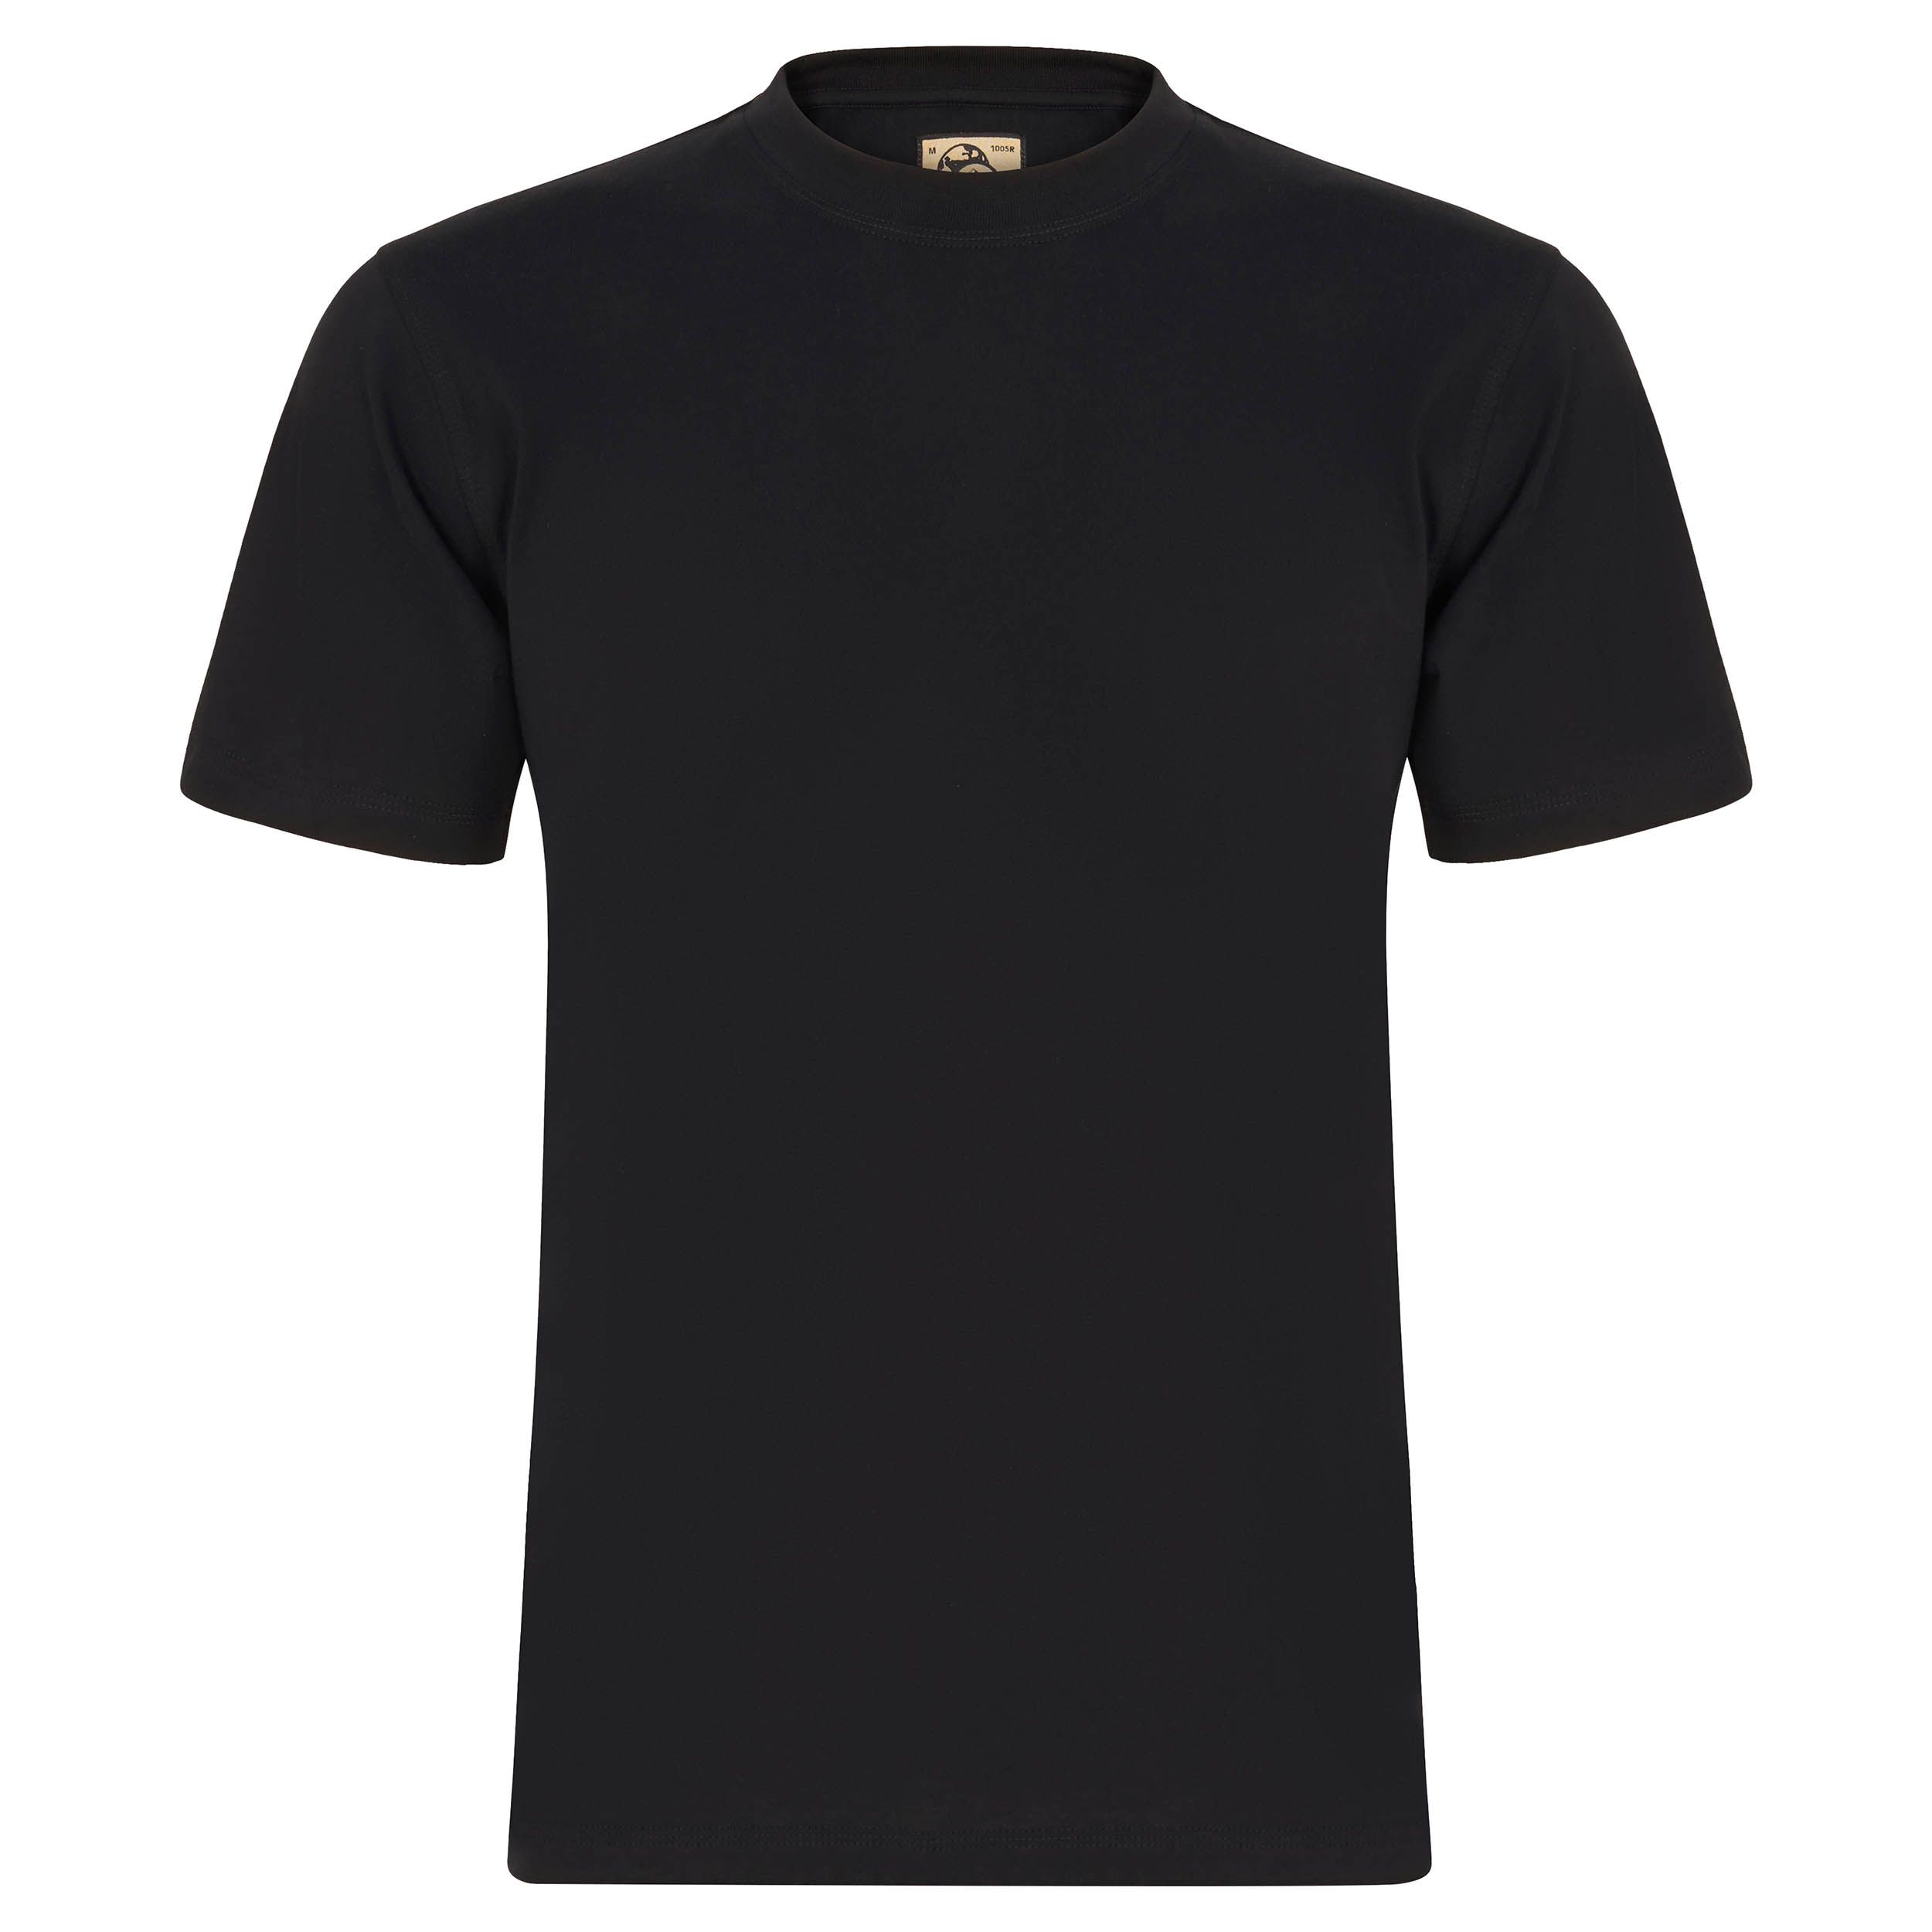 Orn Black Cotton, Recycled Polyester Short Sleeve T-Shirt, UK- M, EUR- M